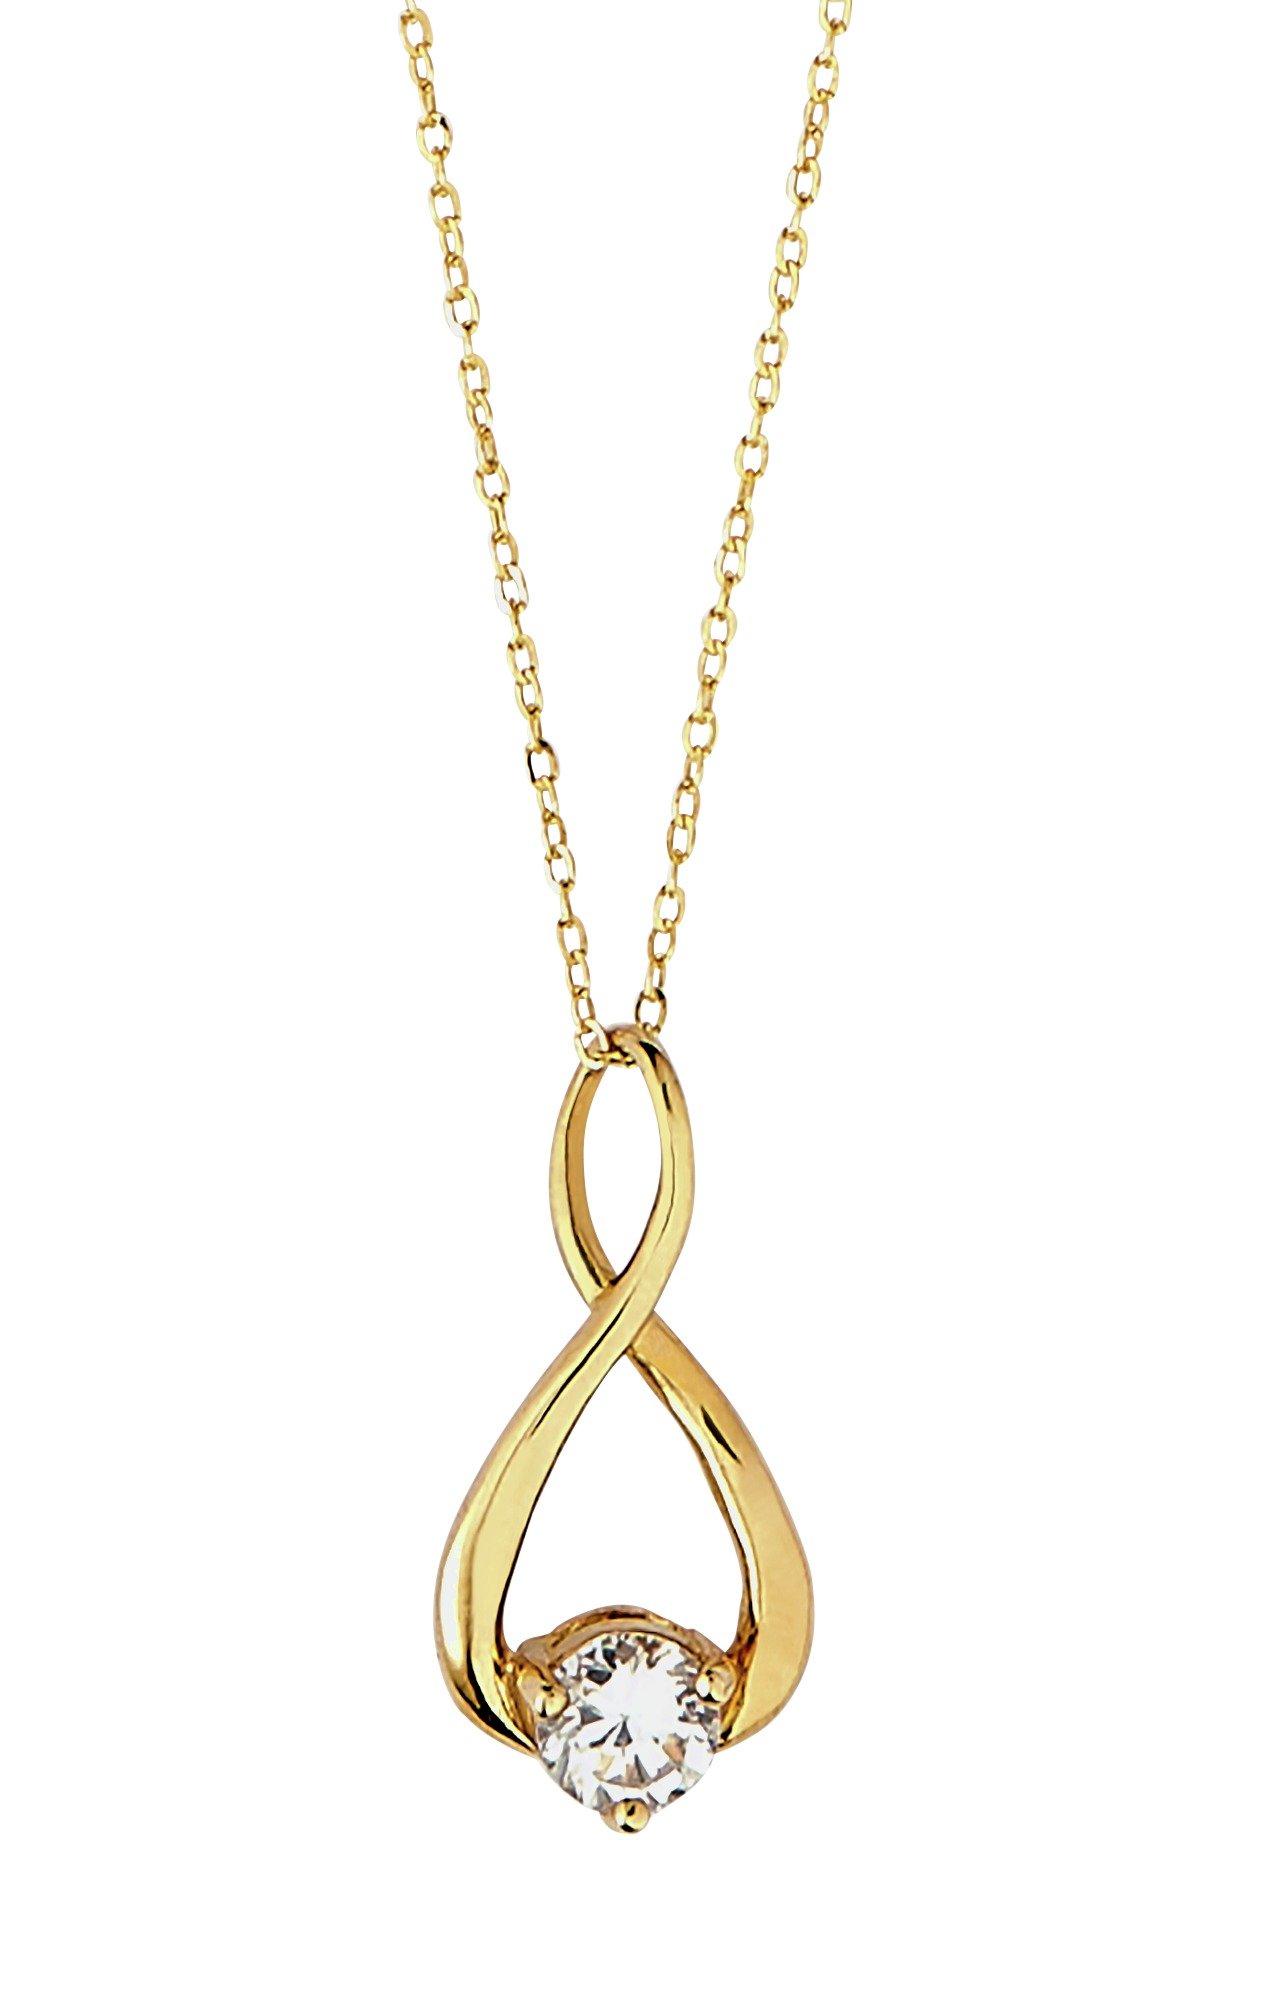 Revere 9ct Gold Figure of 8 Pendant 18 Inch Necklace